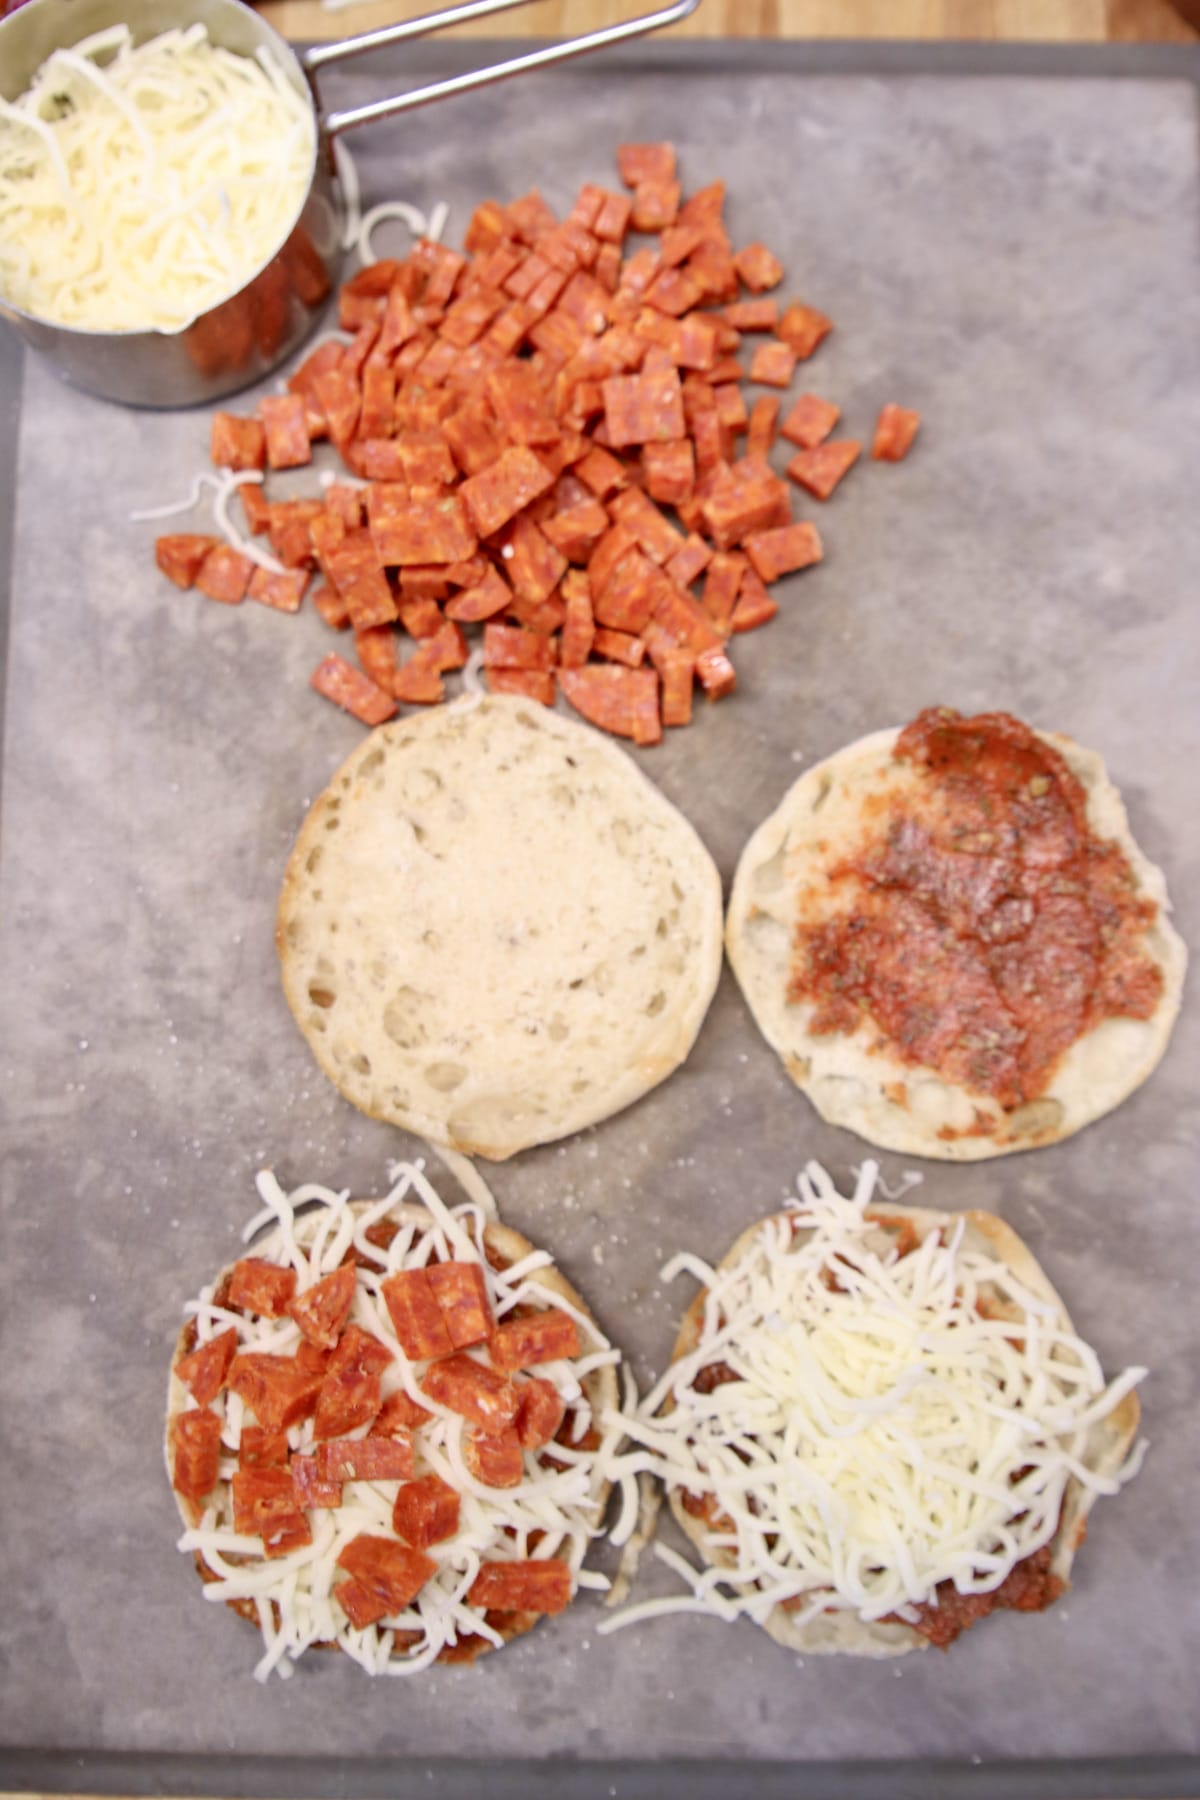 Topping English muffins with pizza toppings.